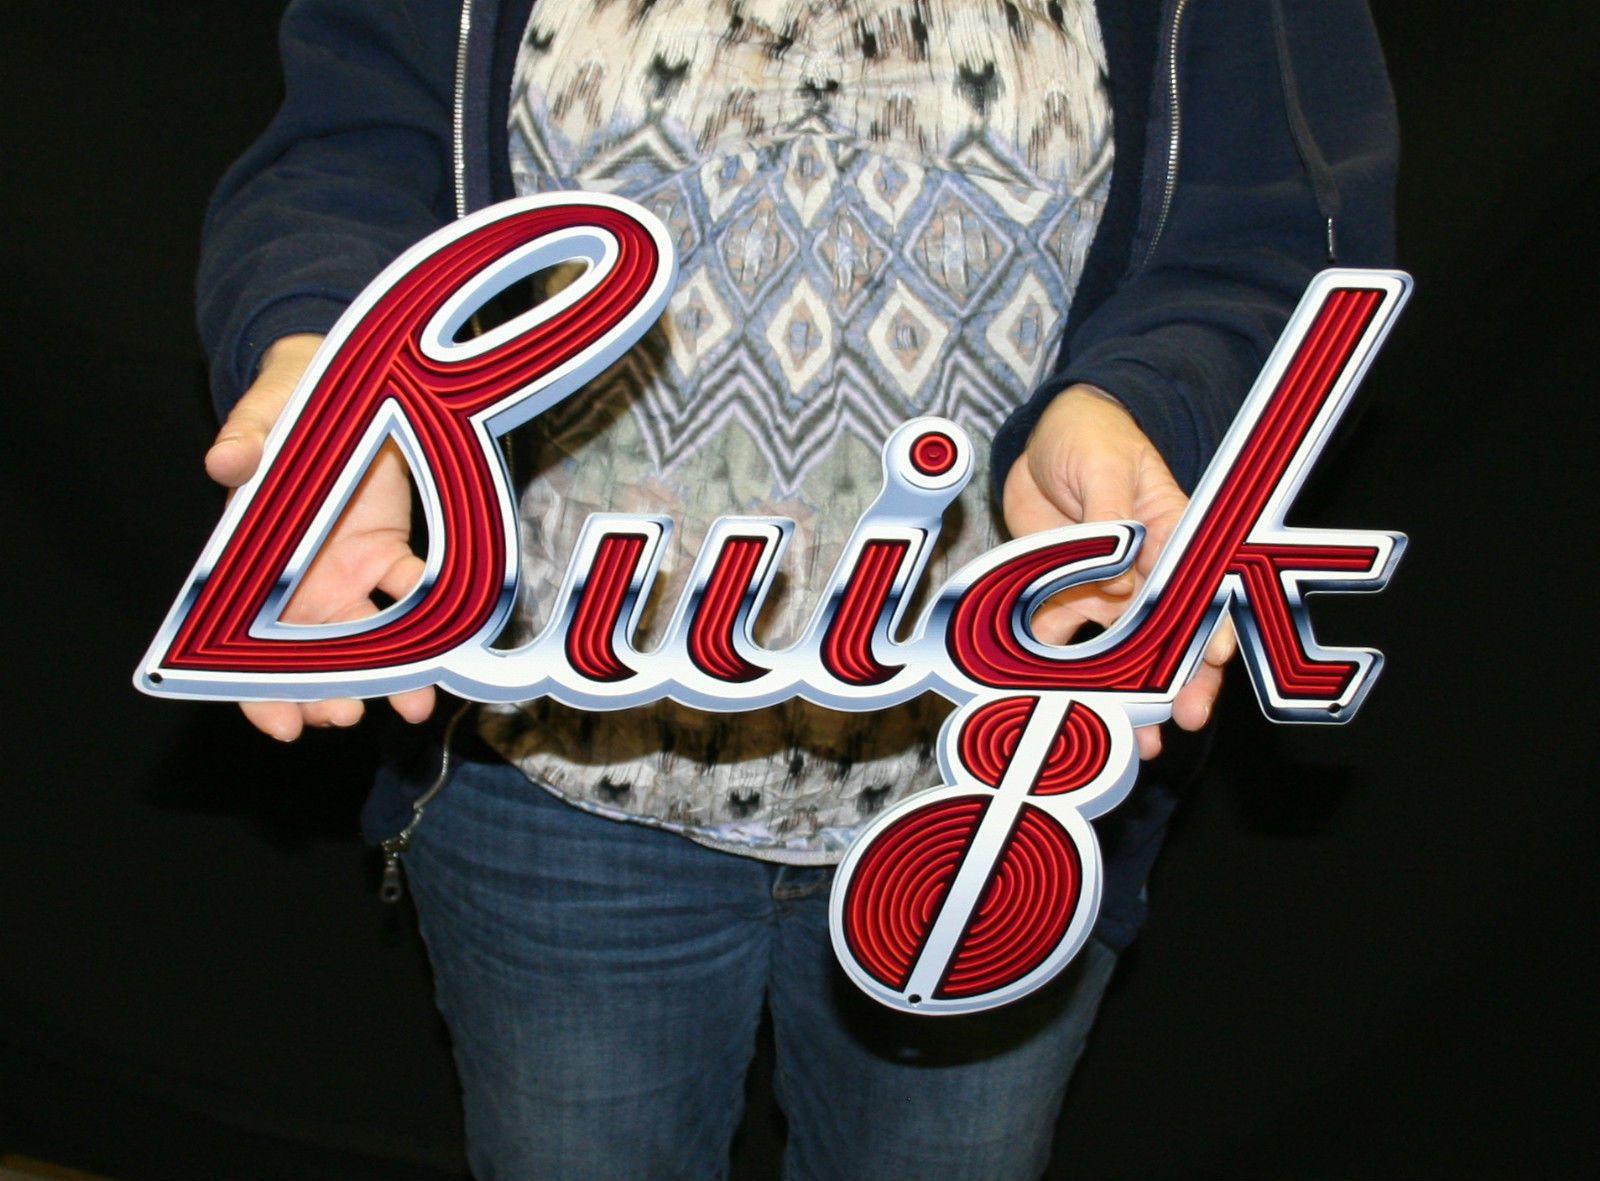 Buick 8 Logo - BUICK 8 EMBLEM STEEL SIGN – GMOLDS002 18X13 | Custom Steel Signs and ...